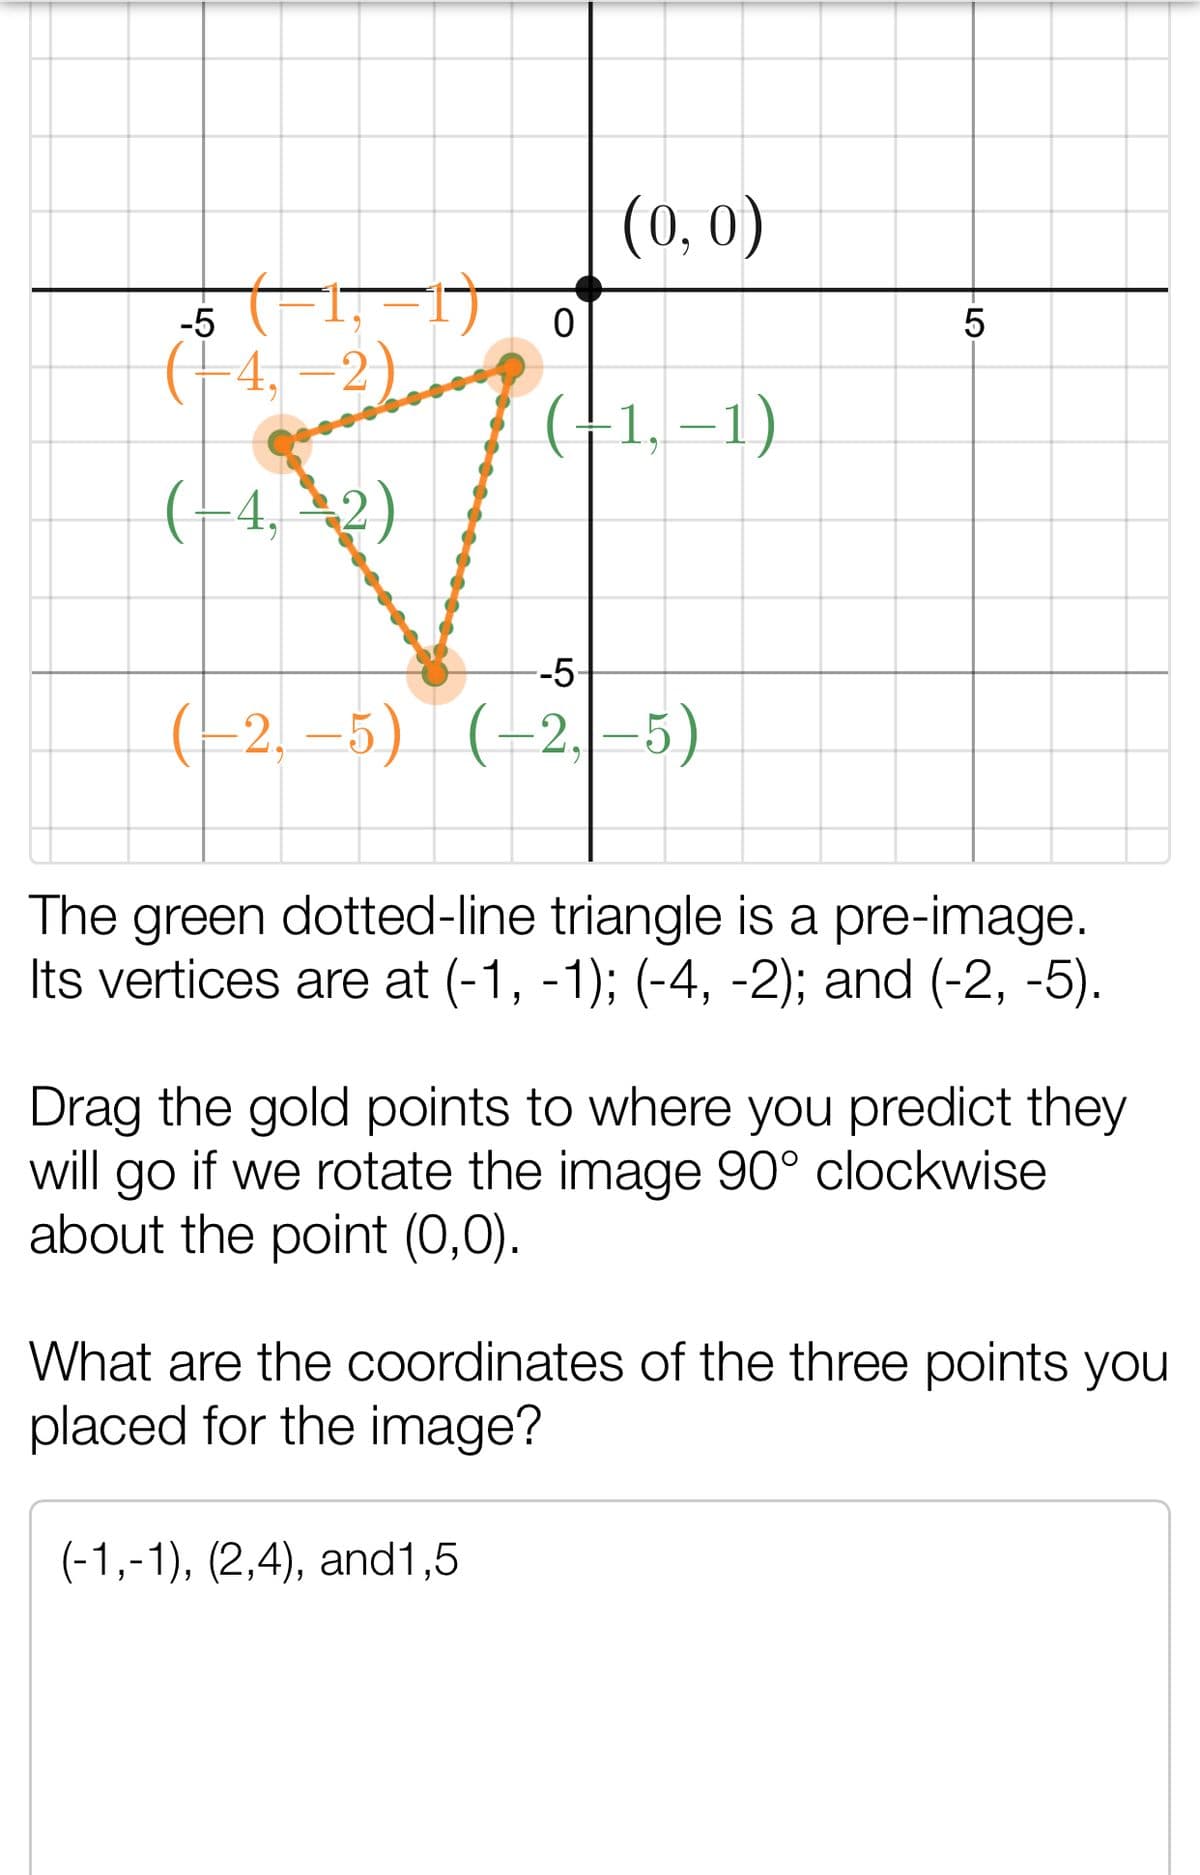 (0, 0)
-5
(+4, =2)
(†1, –1)
(-4, –2)
--5-
(-2, –5) (-2,-5)
The green dotted-line triangle is a pre-image.
Its vertices are at (-1, -1); (-4, -2); and (-2, -5).
Drag the gold points to where you predict they
will go if we rotate the image 90° clockwise
about the point (0,0).
What are the coordinates of the three points you
placed for the image?
(-1,-1), (2,4), and1,5
LO
